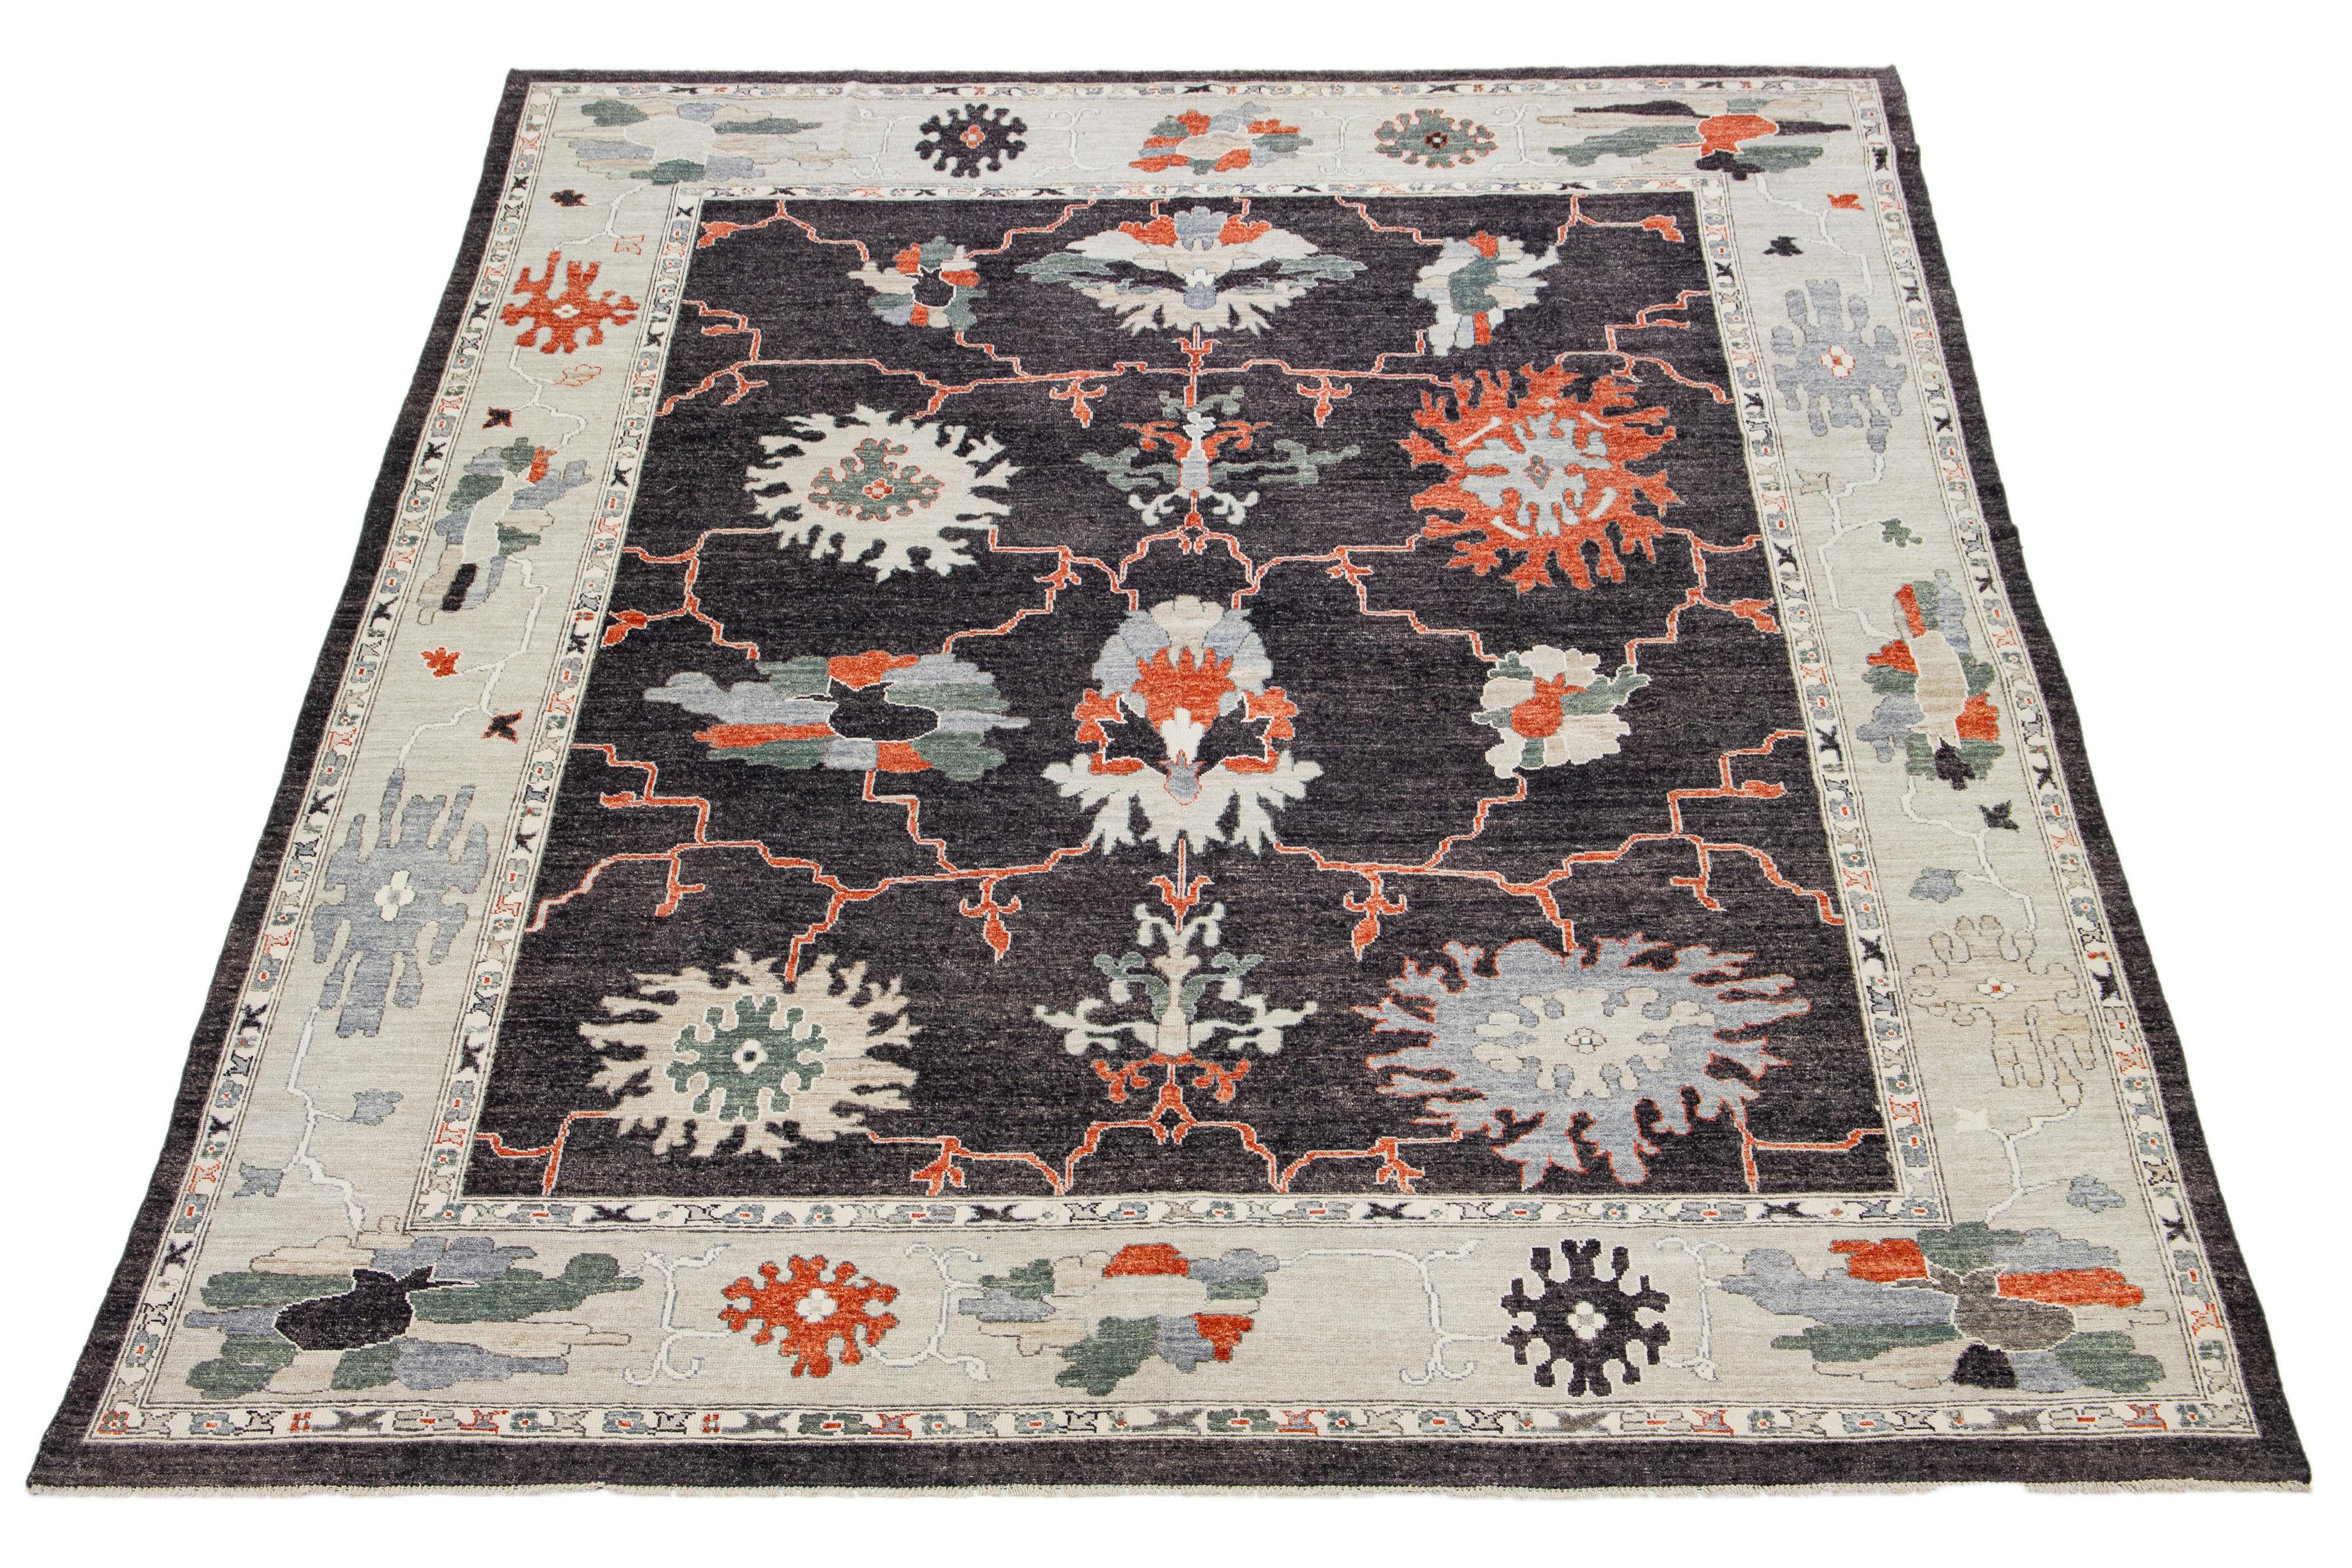 This oversized wool rug boasts a charming gray charcoal base and captivating floral pattern with stunning orange, gray, and green accents. It's hand-knotted with utmost attention to detail and will complement any decor.

This rug measures 11'11